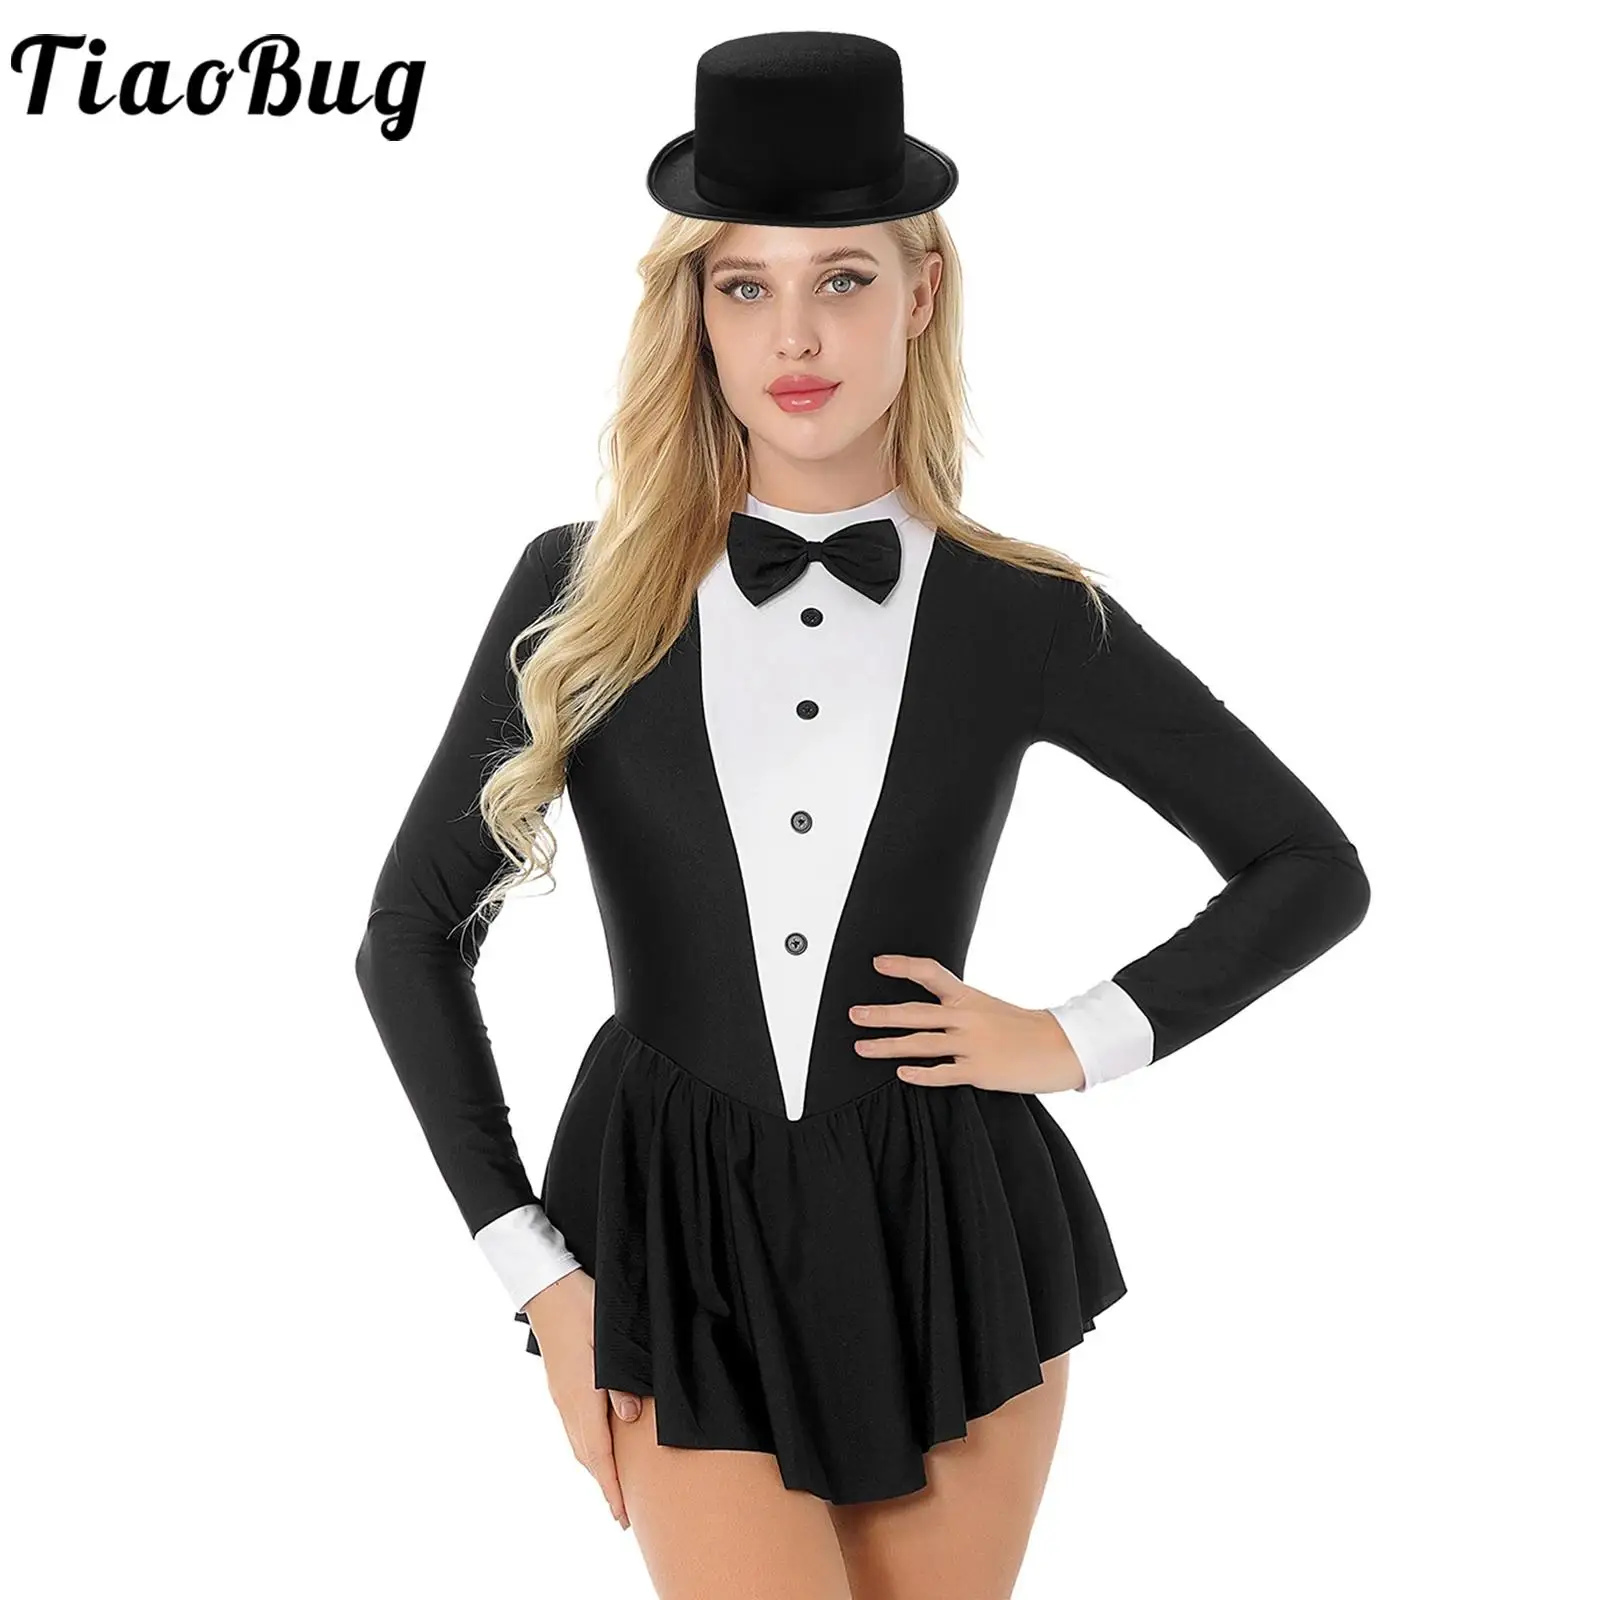 

Womens Contrast Color Tuxedo Bowknot Button Long Sleeve Ruffle Dress Dancewear with Hat for Role Play Theme Party Masquerade